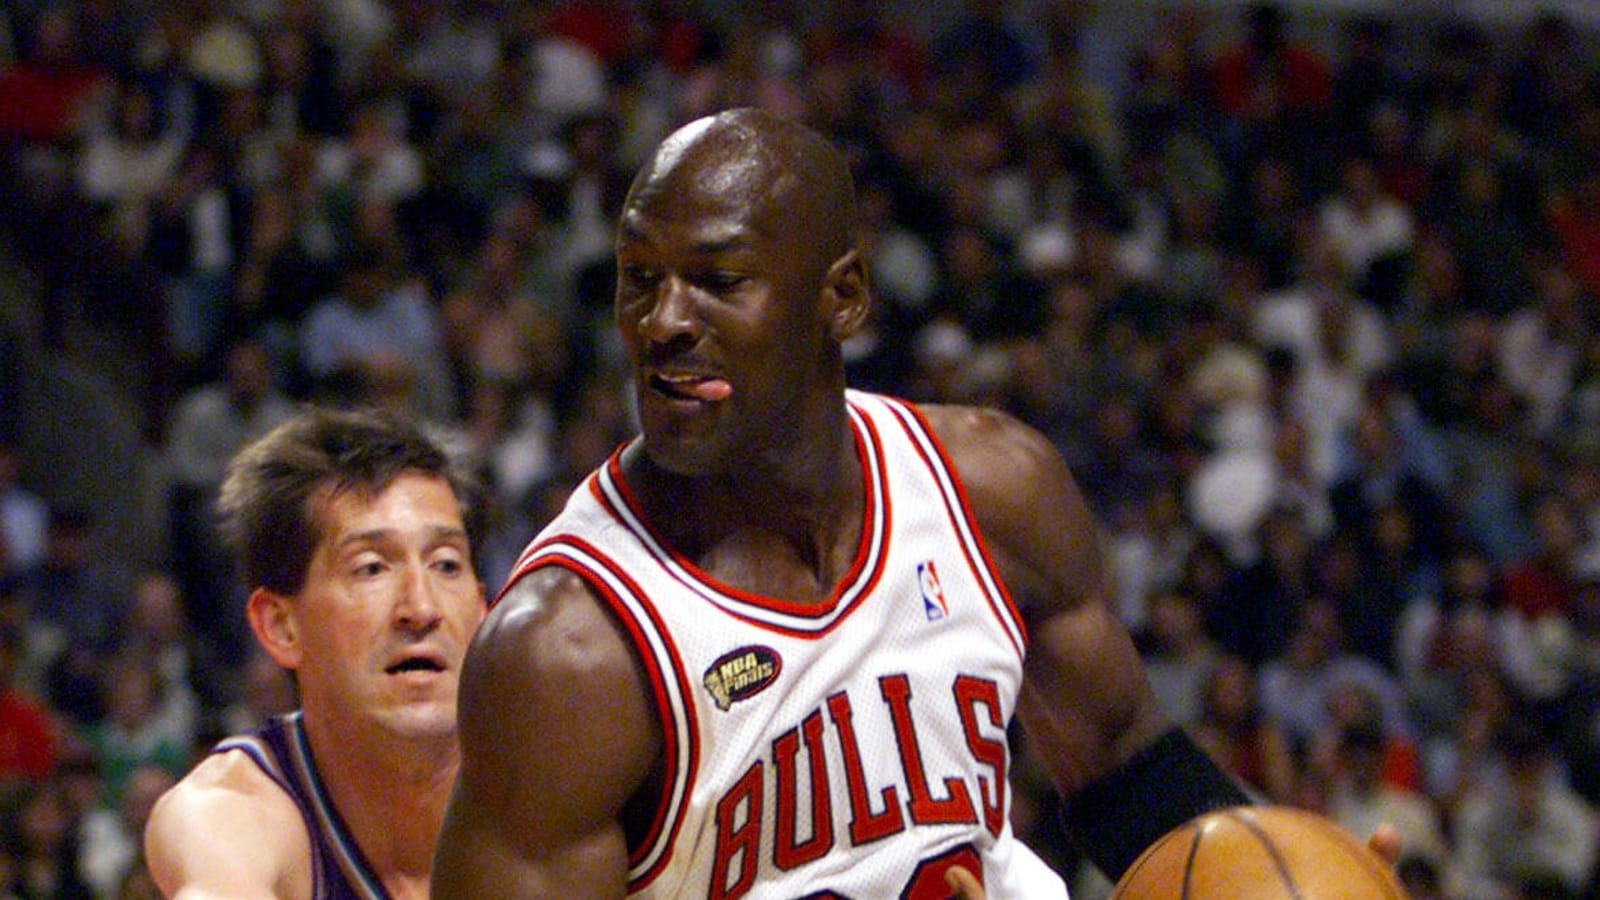 Coach Jerry Sloan Refused To Look Before Michael Jordan Scored Over Bryon Russell: “He Knew”